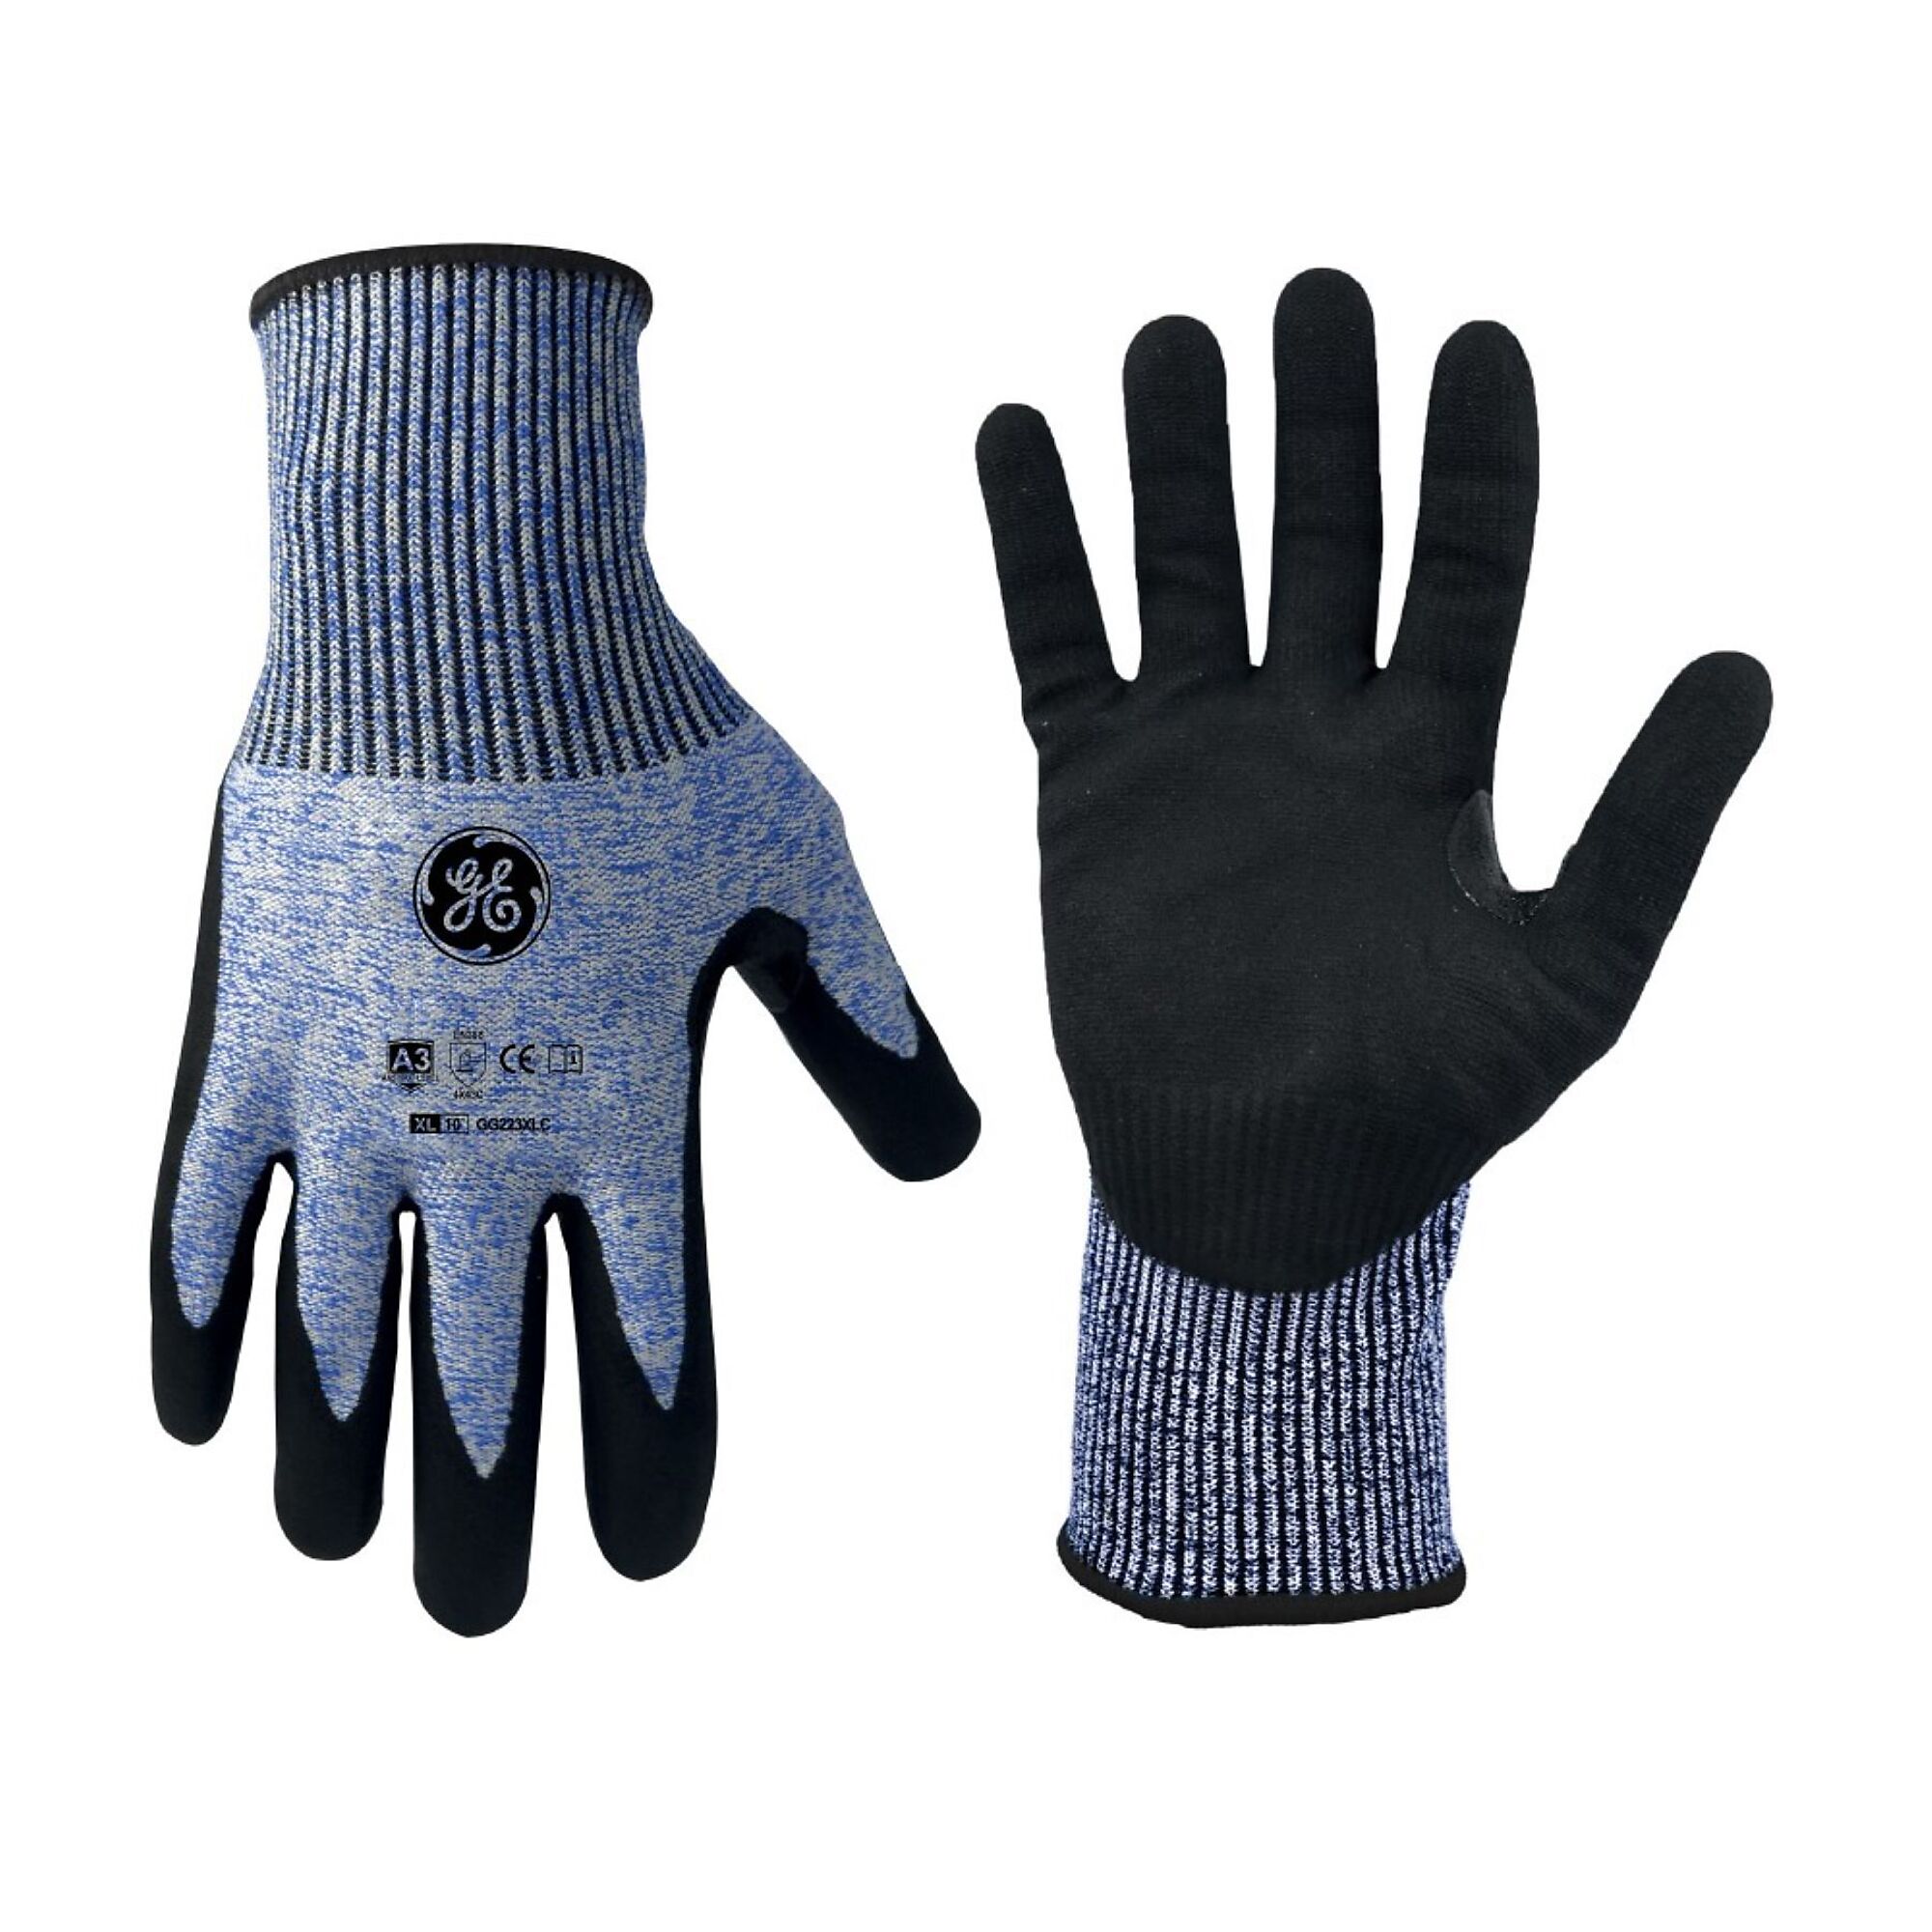 General Electric, Unisex Dipped Gloves Black/Blue XL 12 pair, Size XL, Included (qty.) 12, Model GG223XL